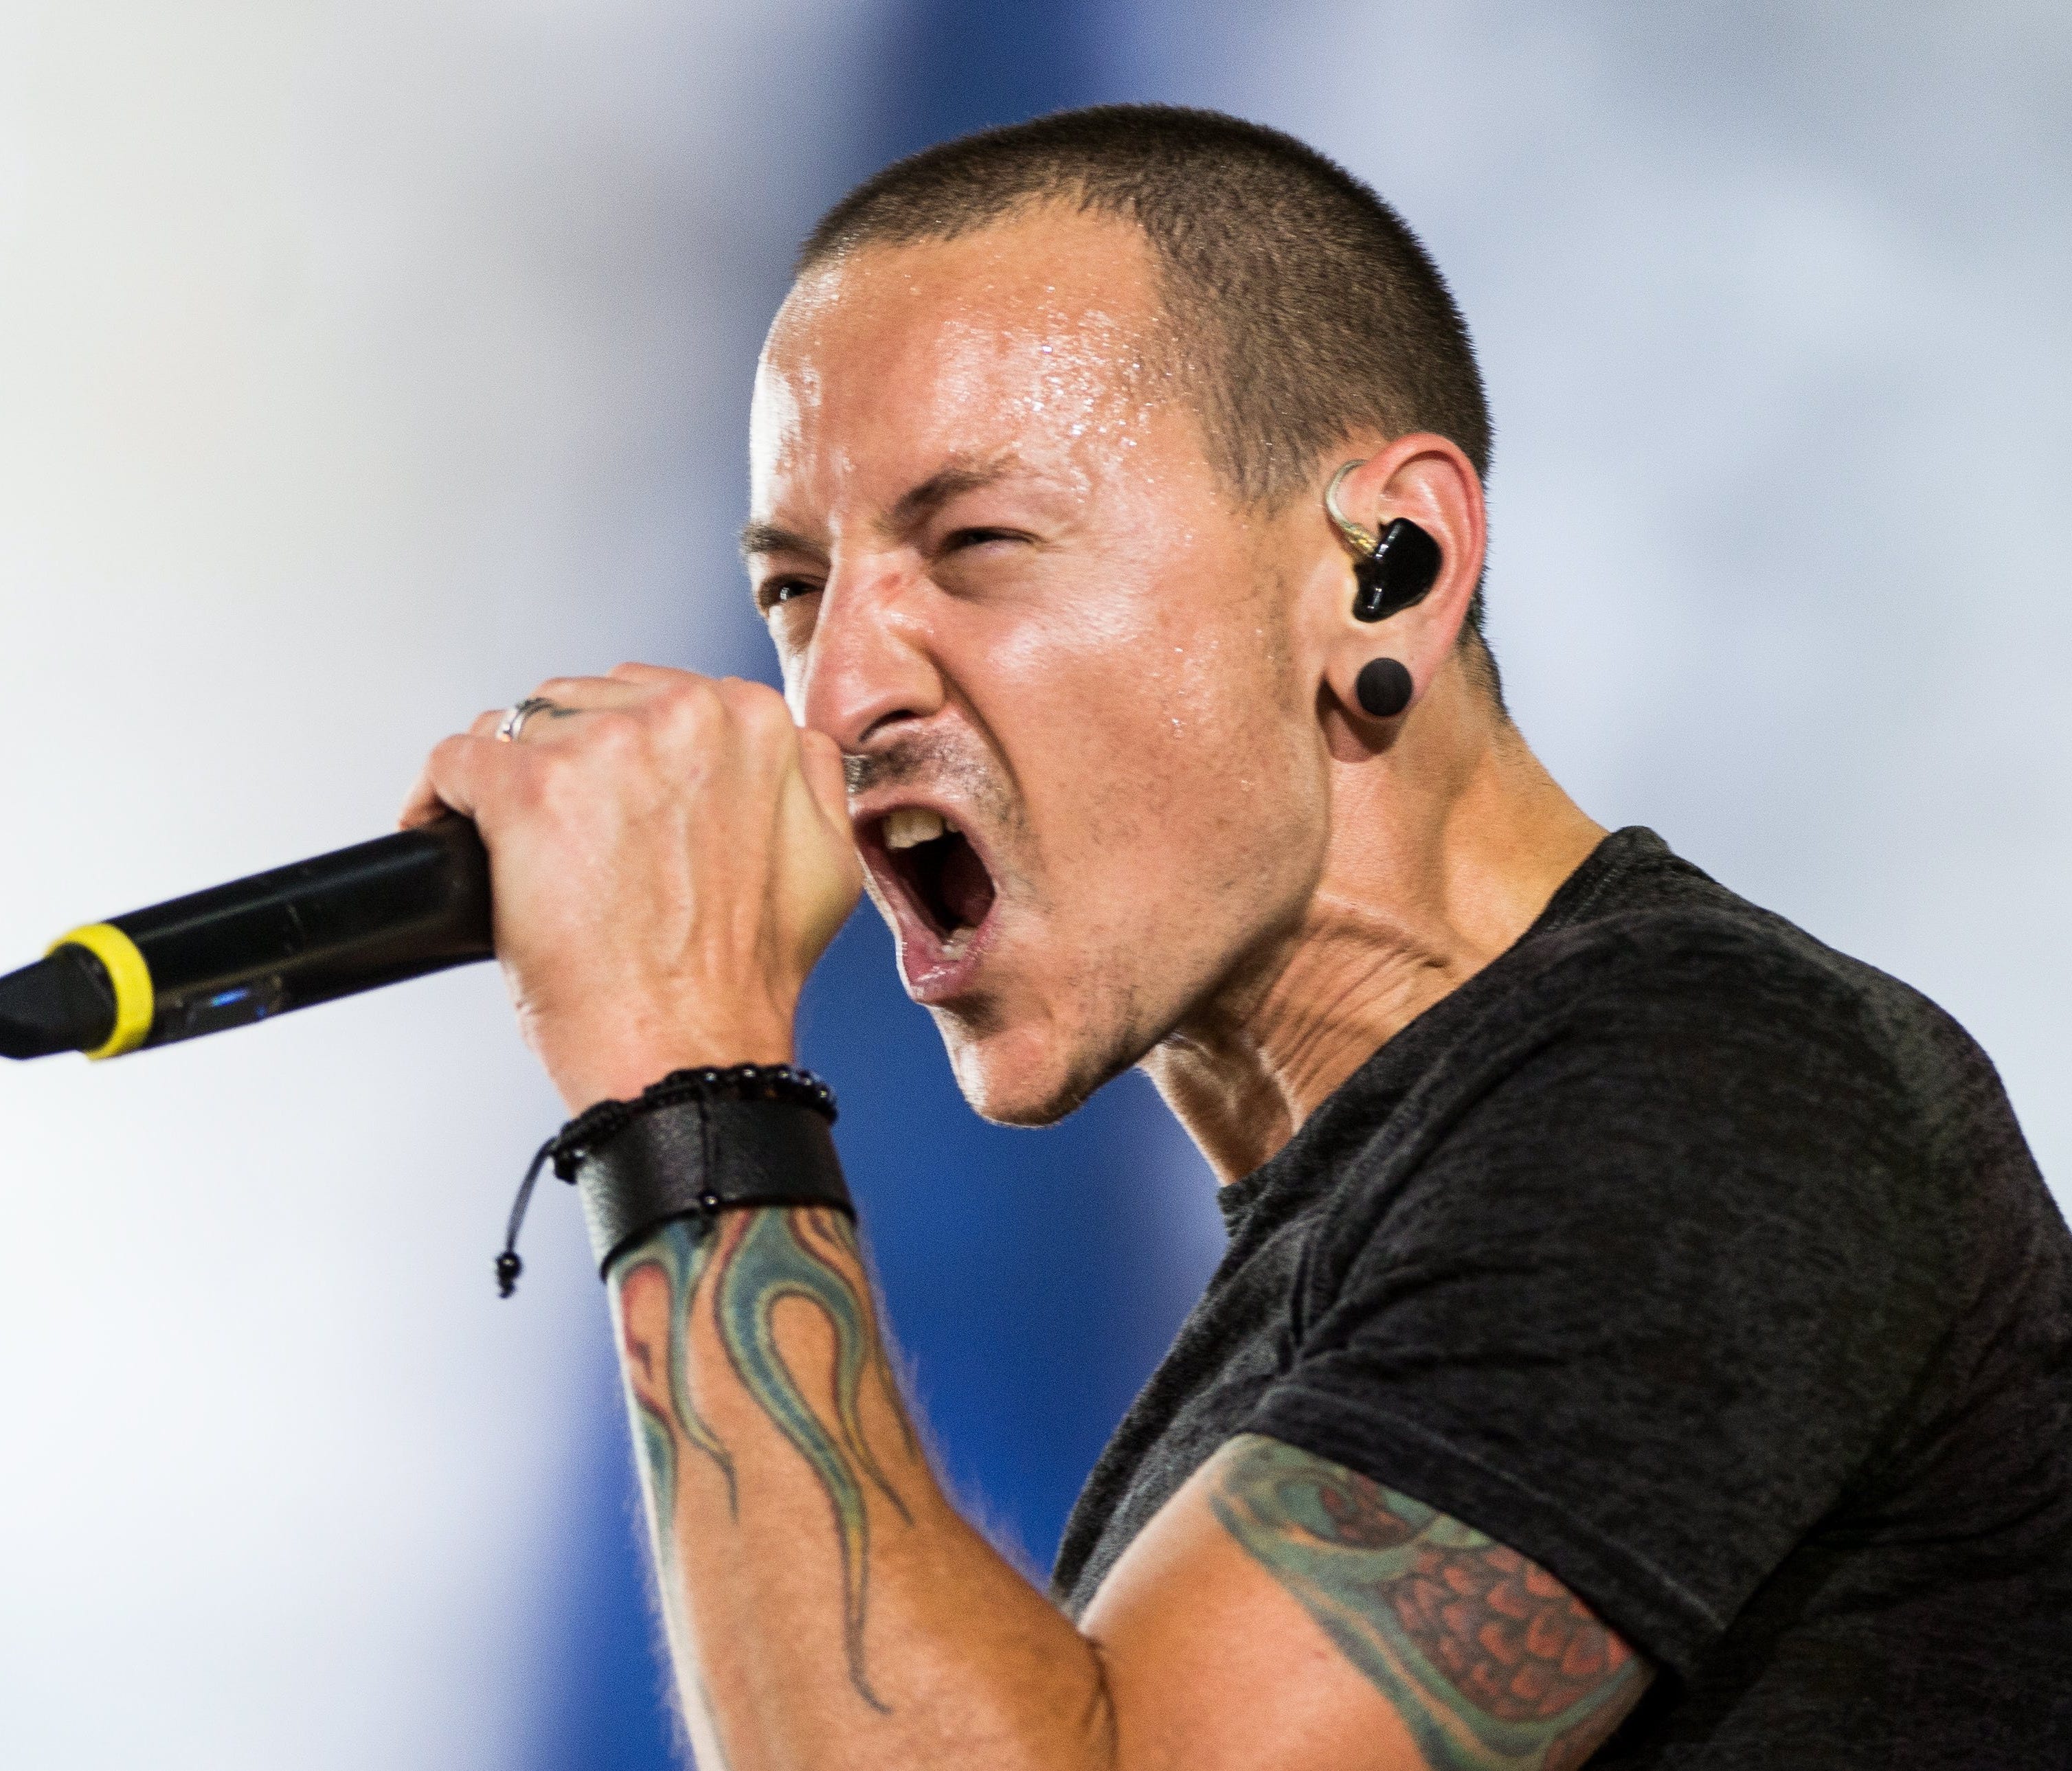 The Los Angeles County Coroner's office has officially concluded Linkin Park singer Chester Bennington died from hanging.